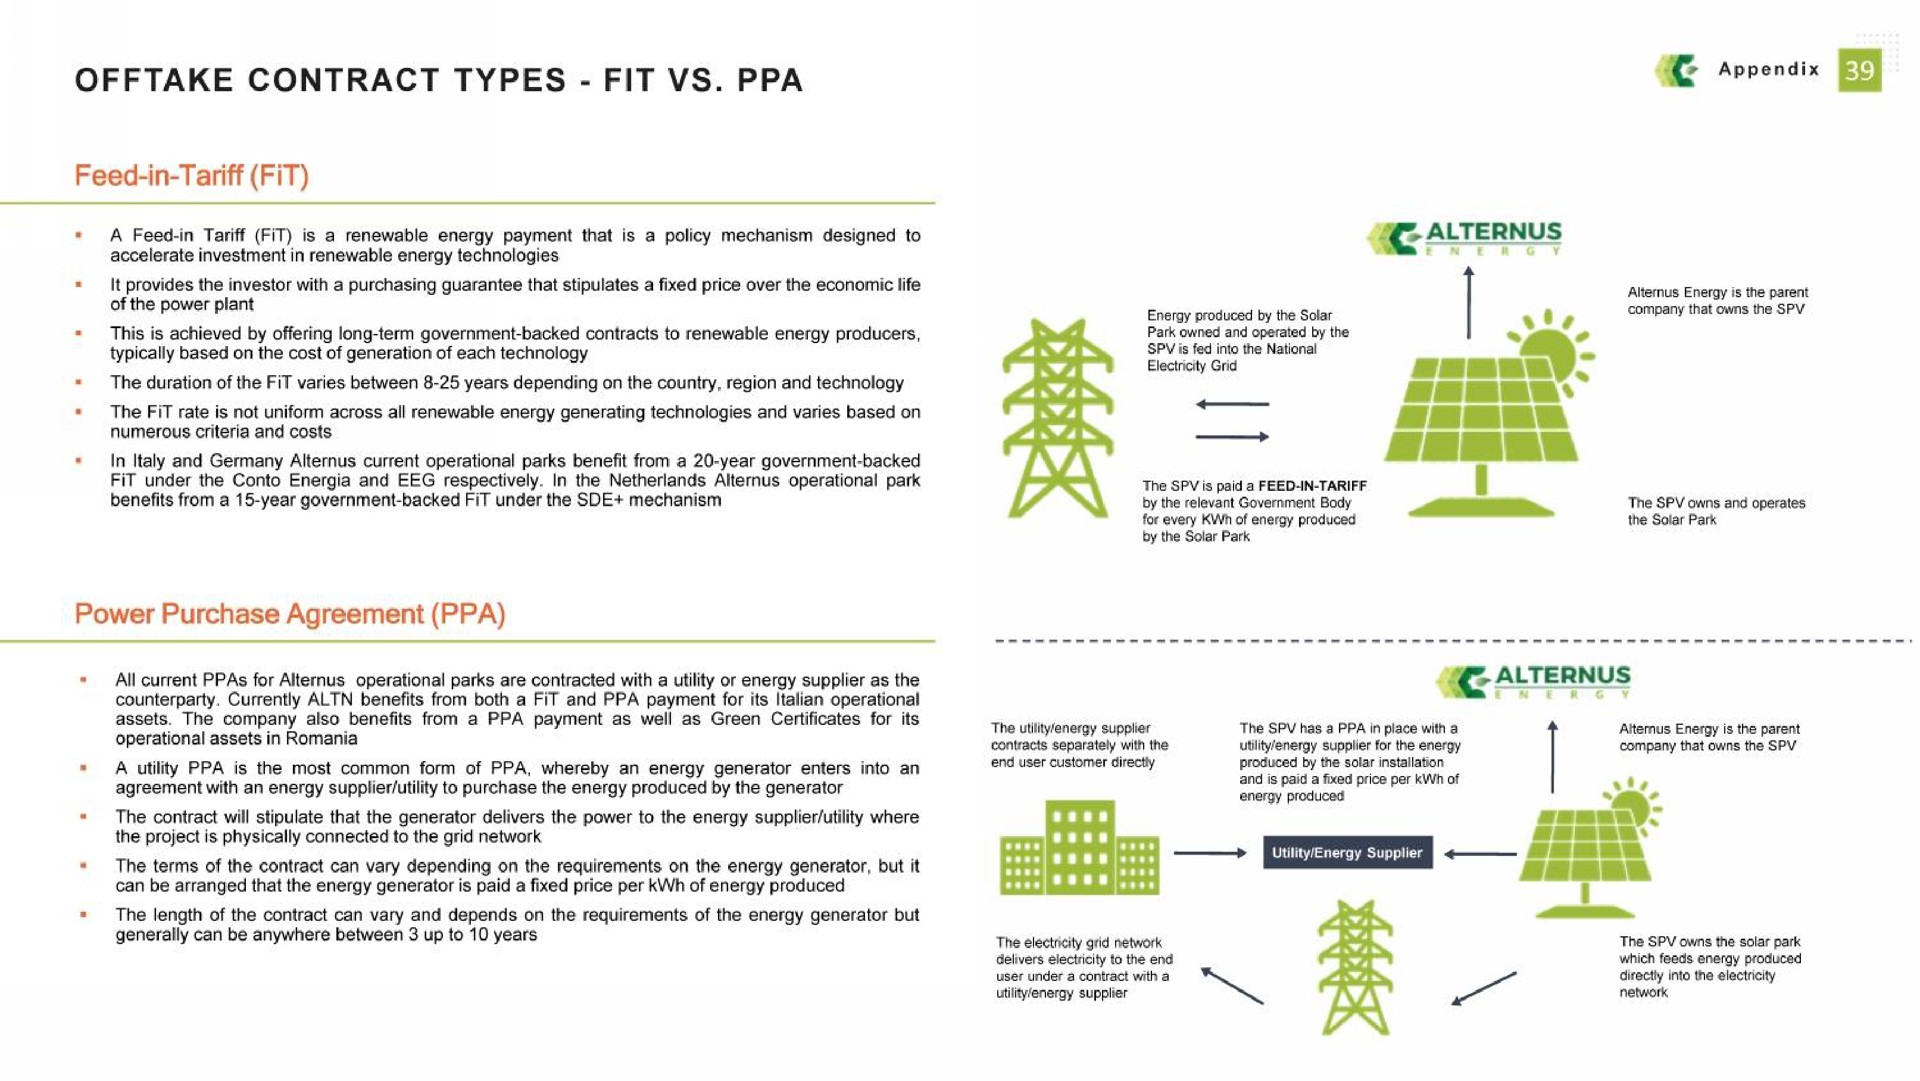 offtake contract types fit a | Alternus Energy